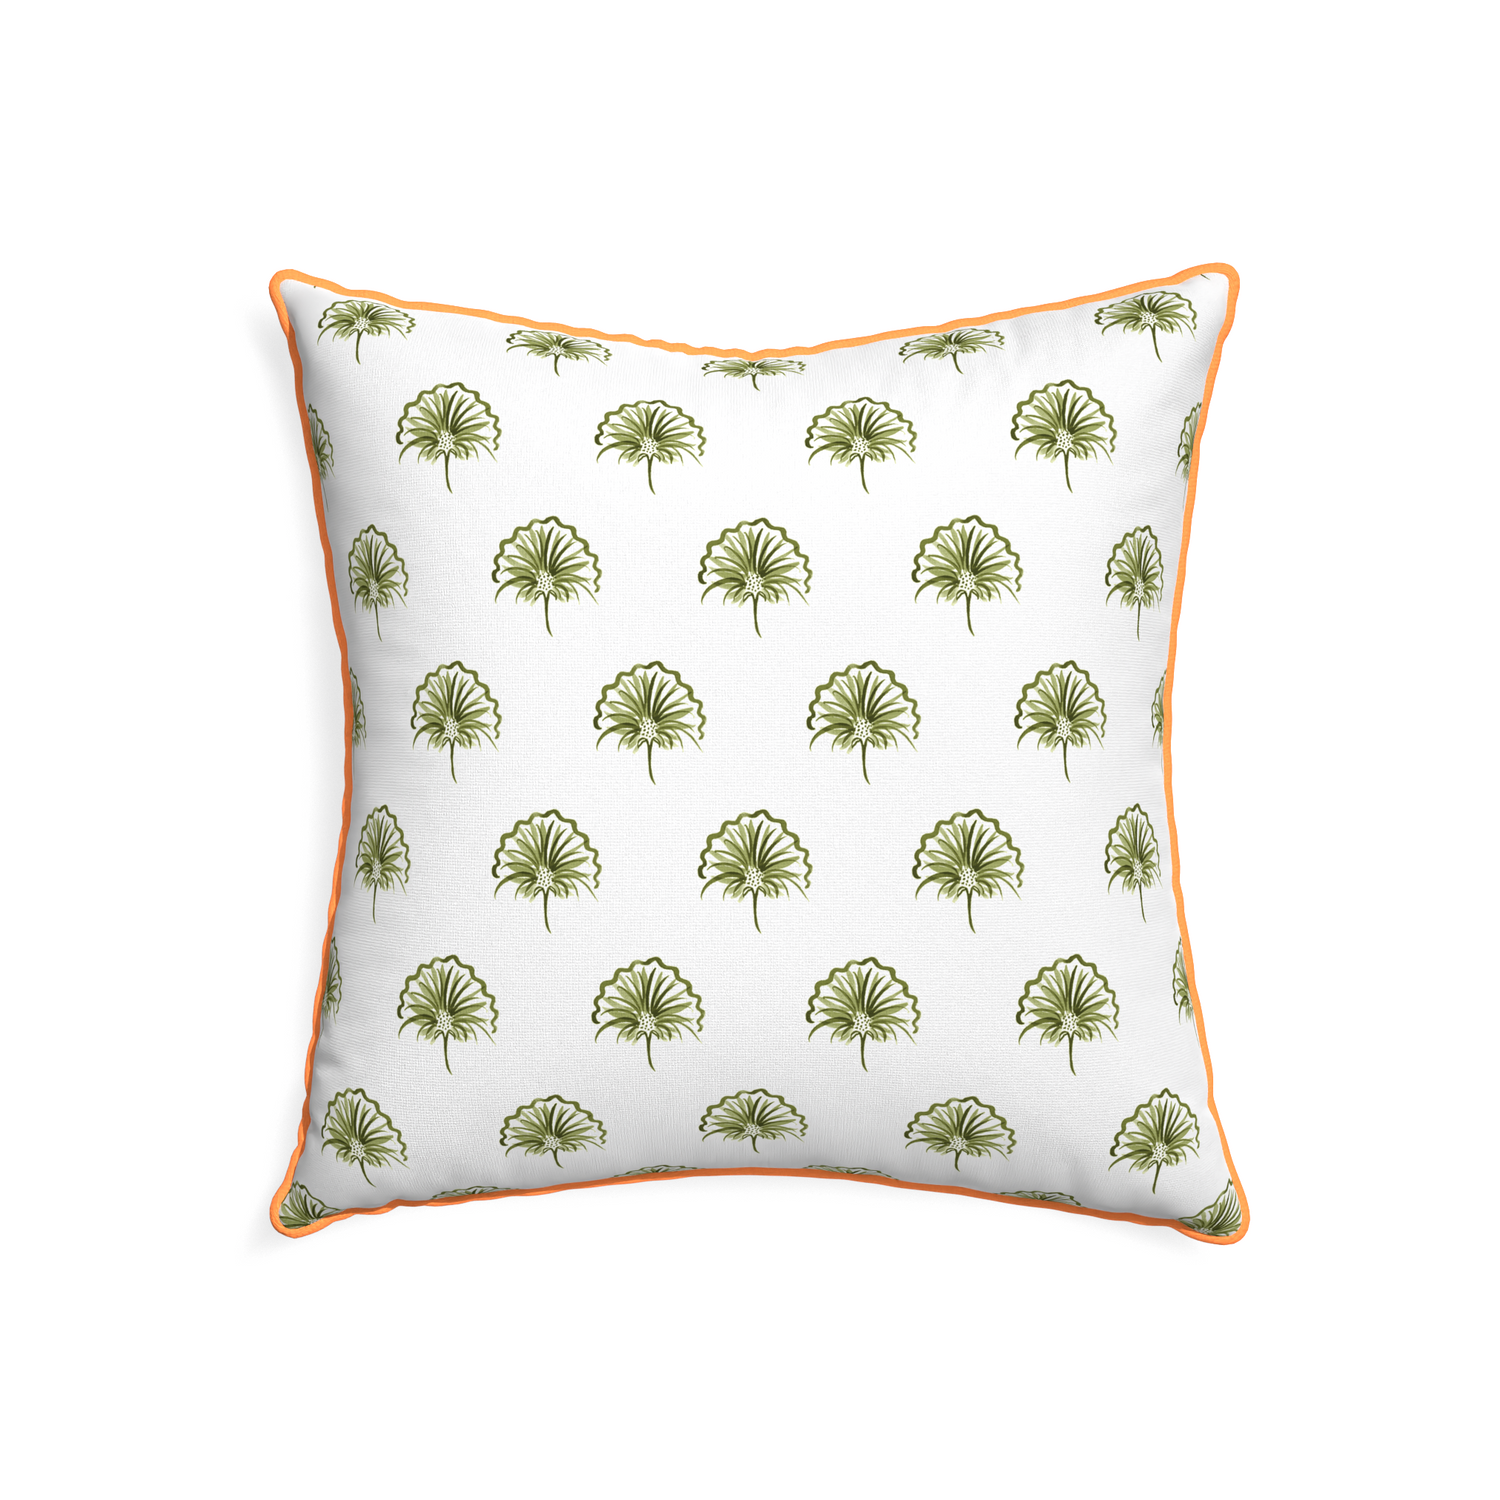 22-square penelope moss custom green floralpillow with clementine piping on white background